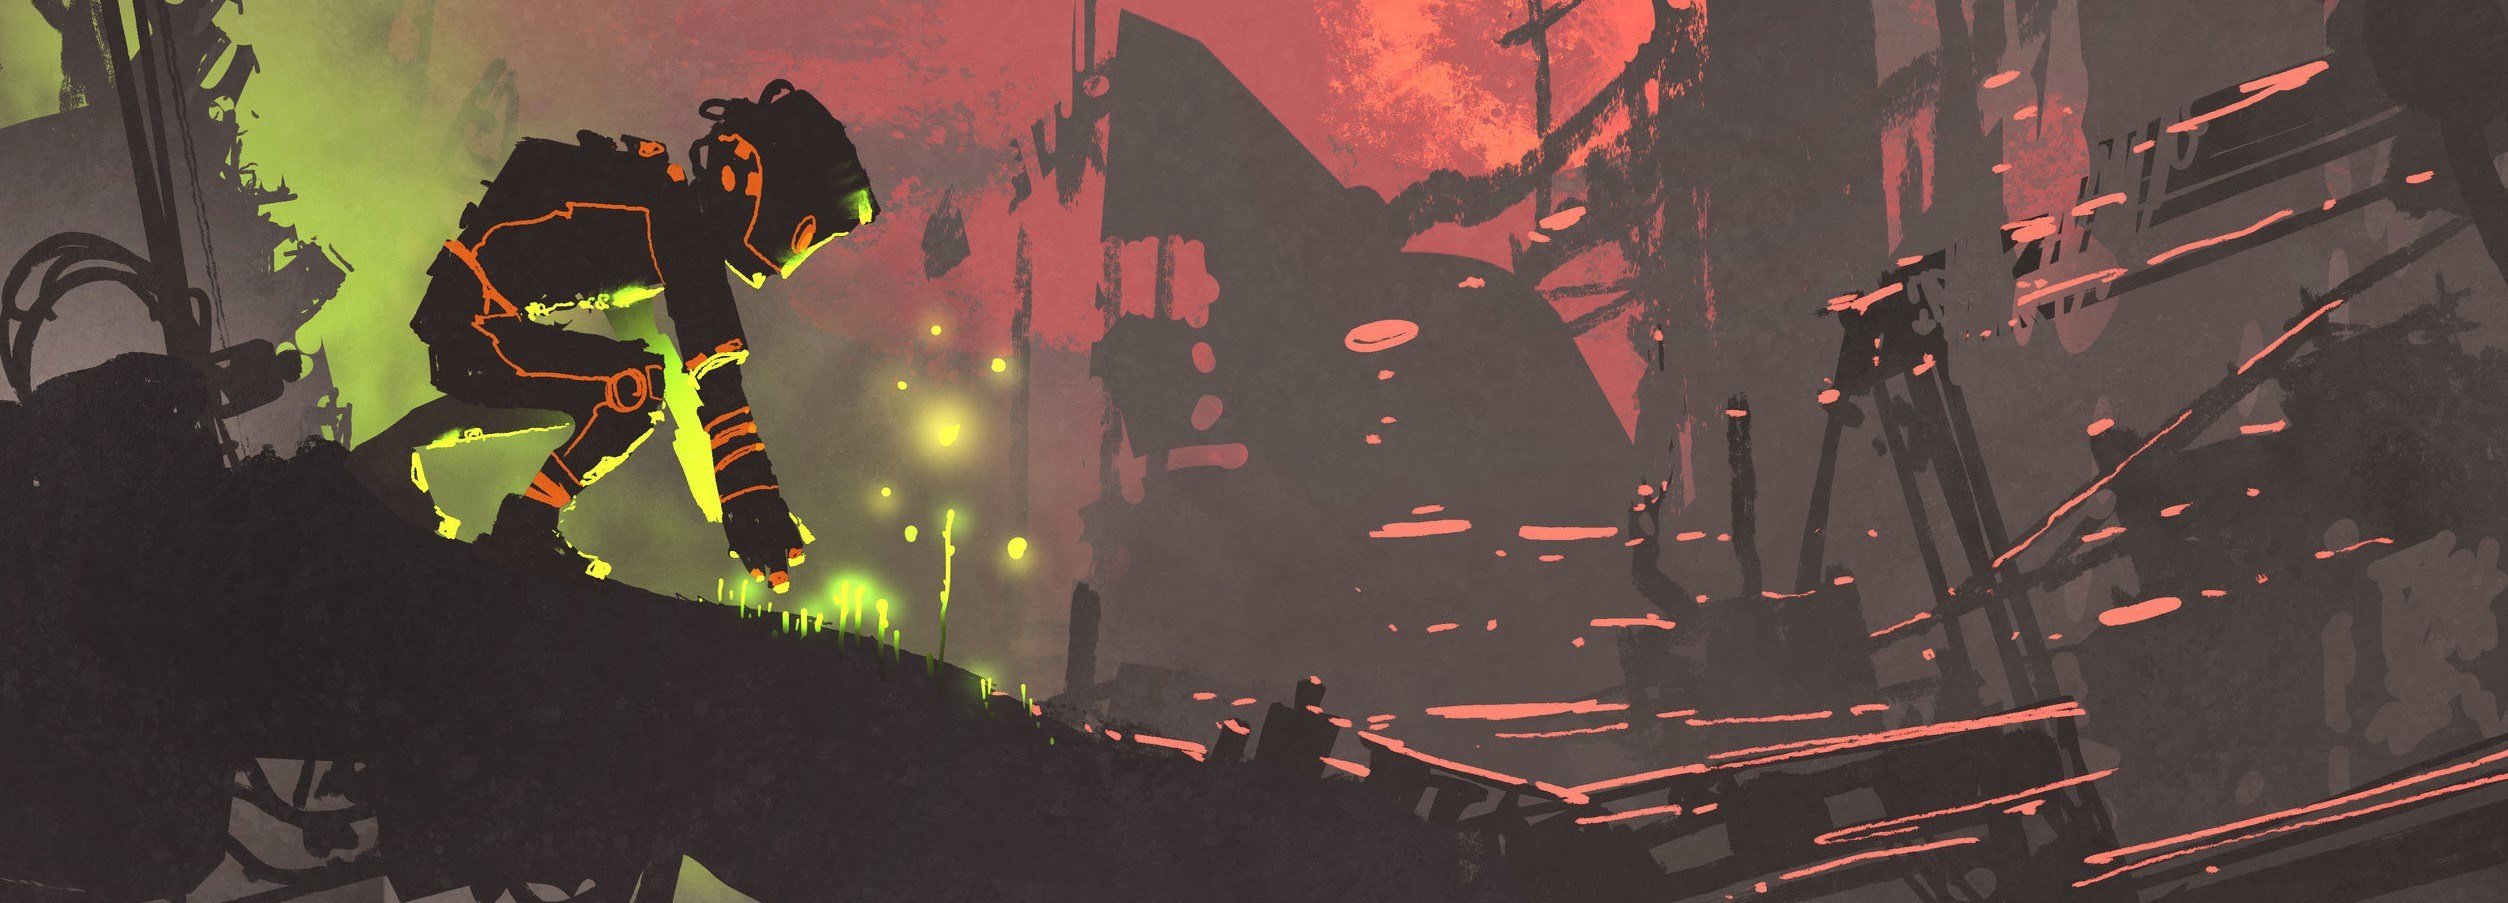 the robot planting seeds in the ruin city at sunset, illustration painting